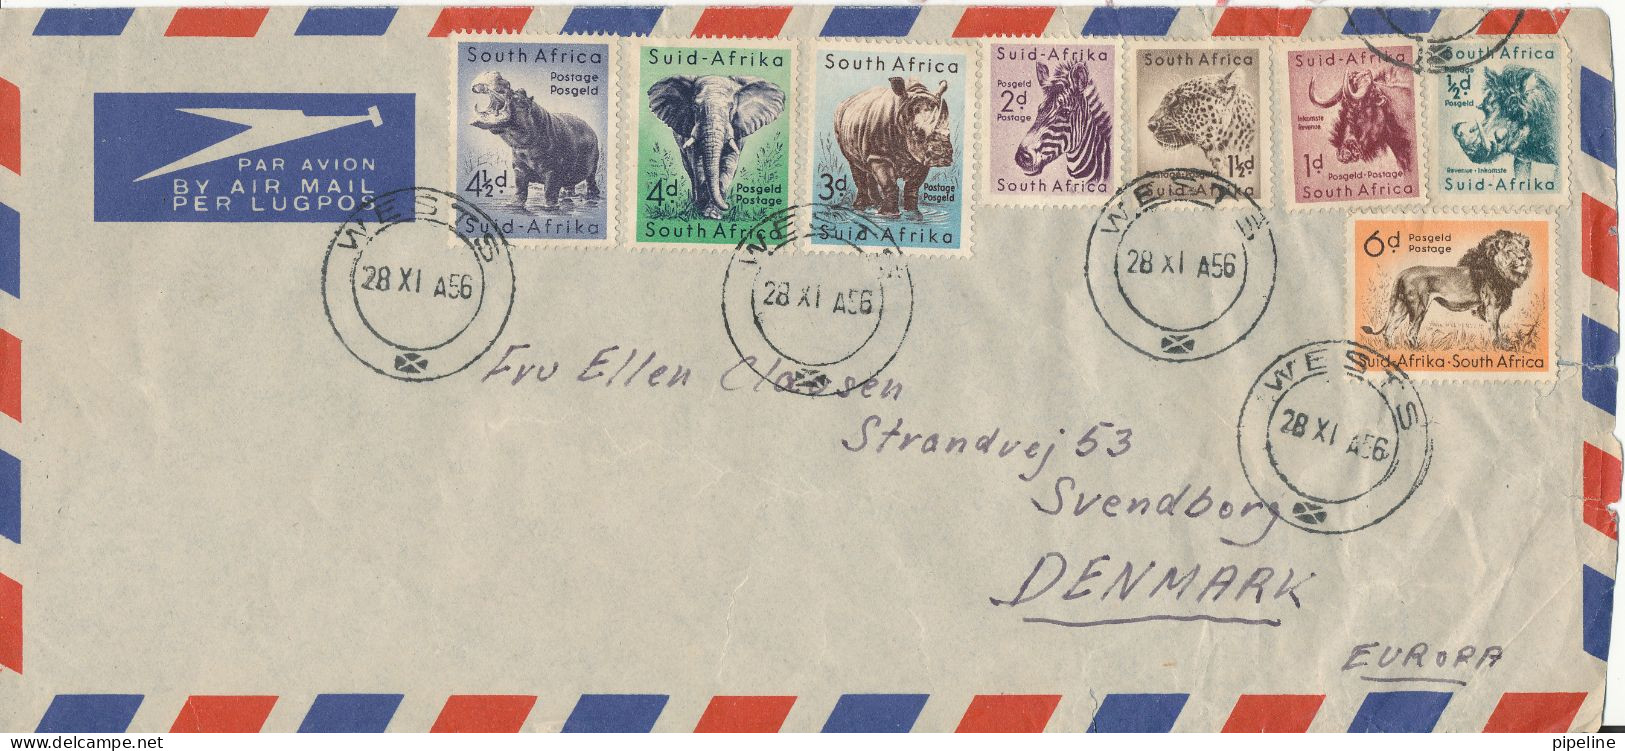 South Africa -Suid Afrika Air Mail Cover Sent To Denmark Wests 28-11-1956 With A Lot Of Topical Stamps - Luftpost